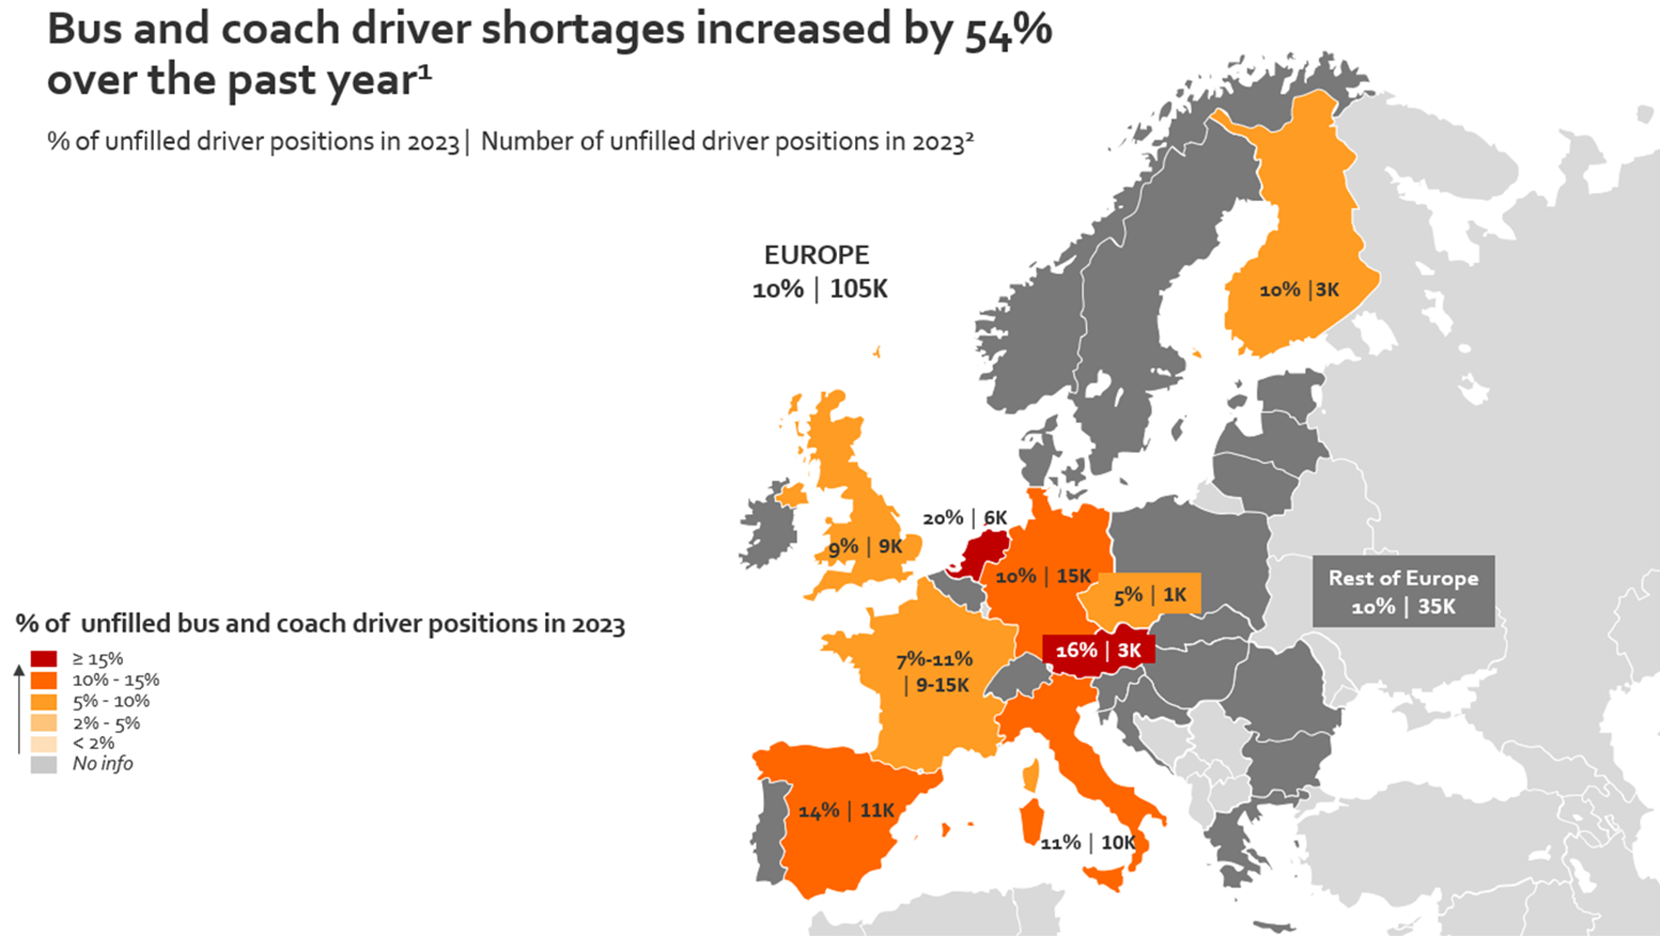 Bus and coach driver shortages increased by 54% over the past year